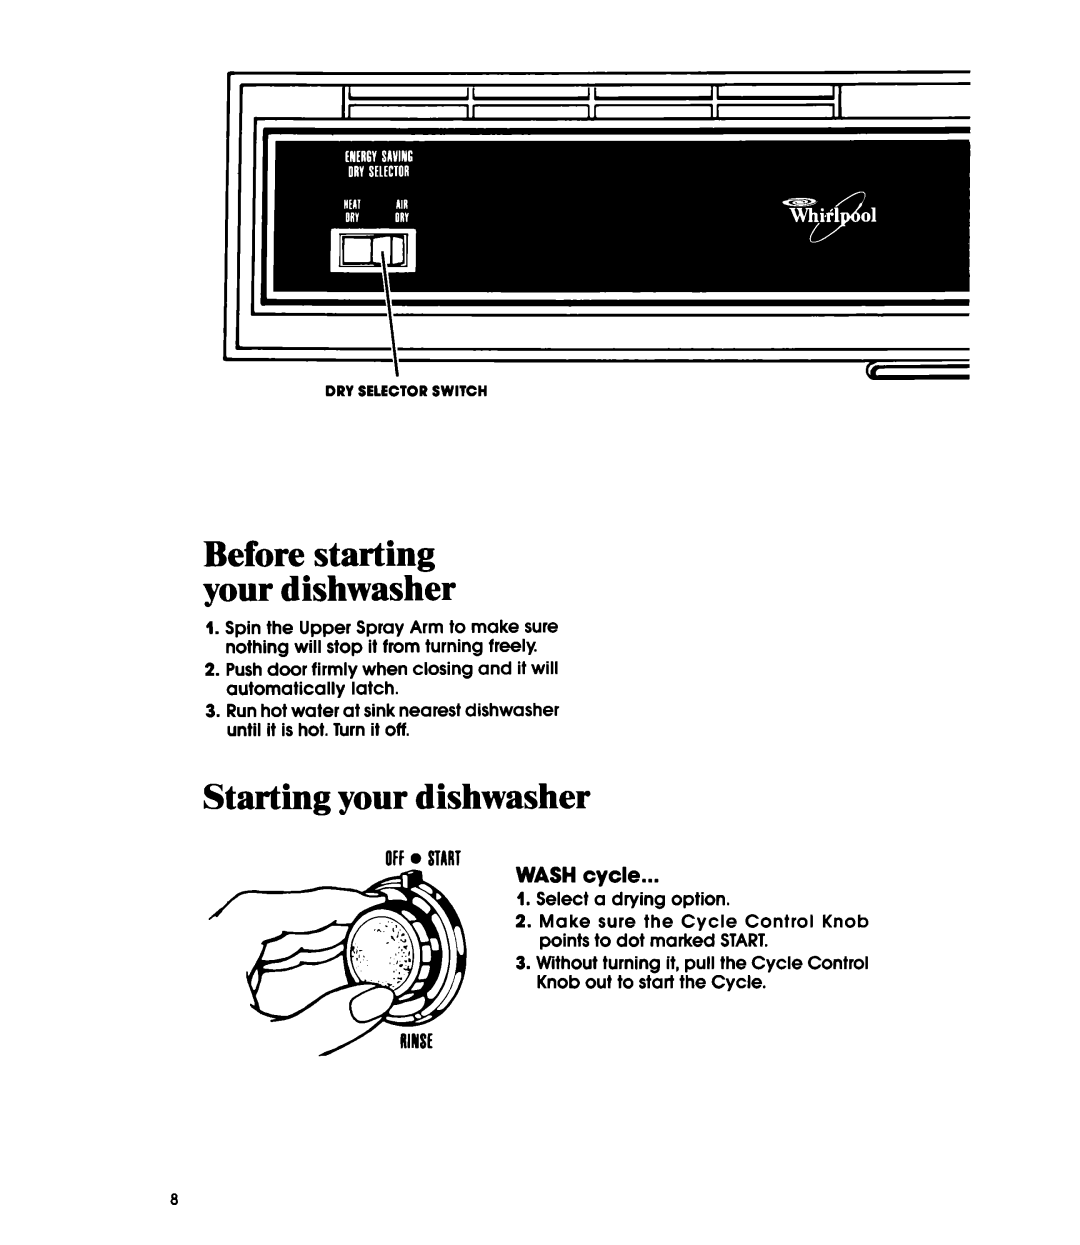 Whirlpool DU1098XR manual Starting your dishwasher, Before starting your dishwasher, WASH cycle 